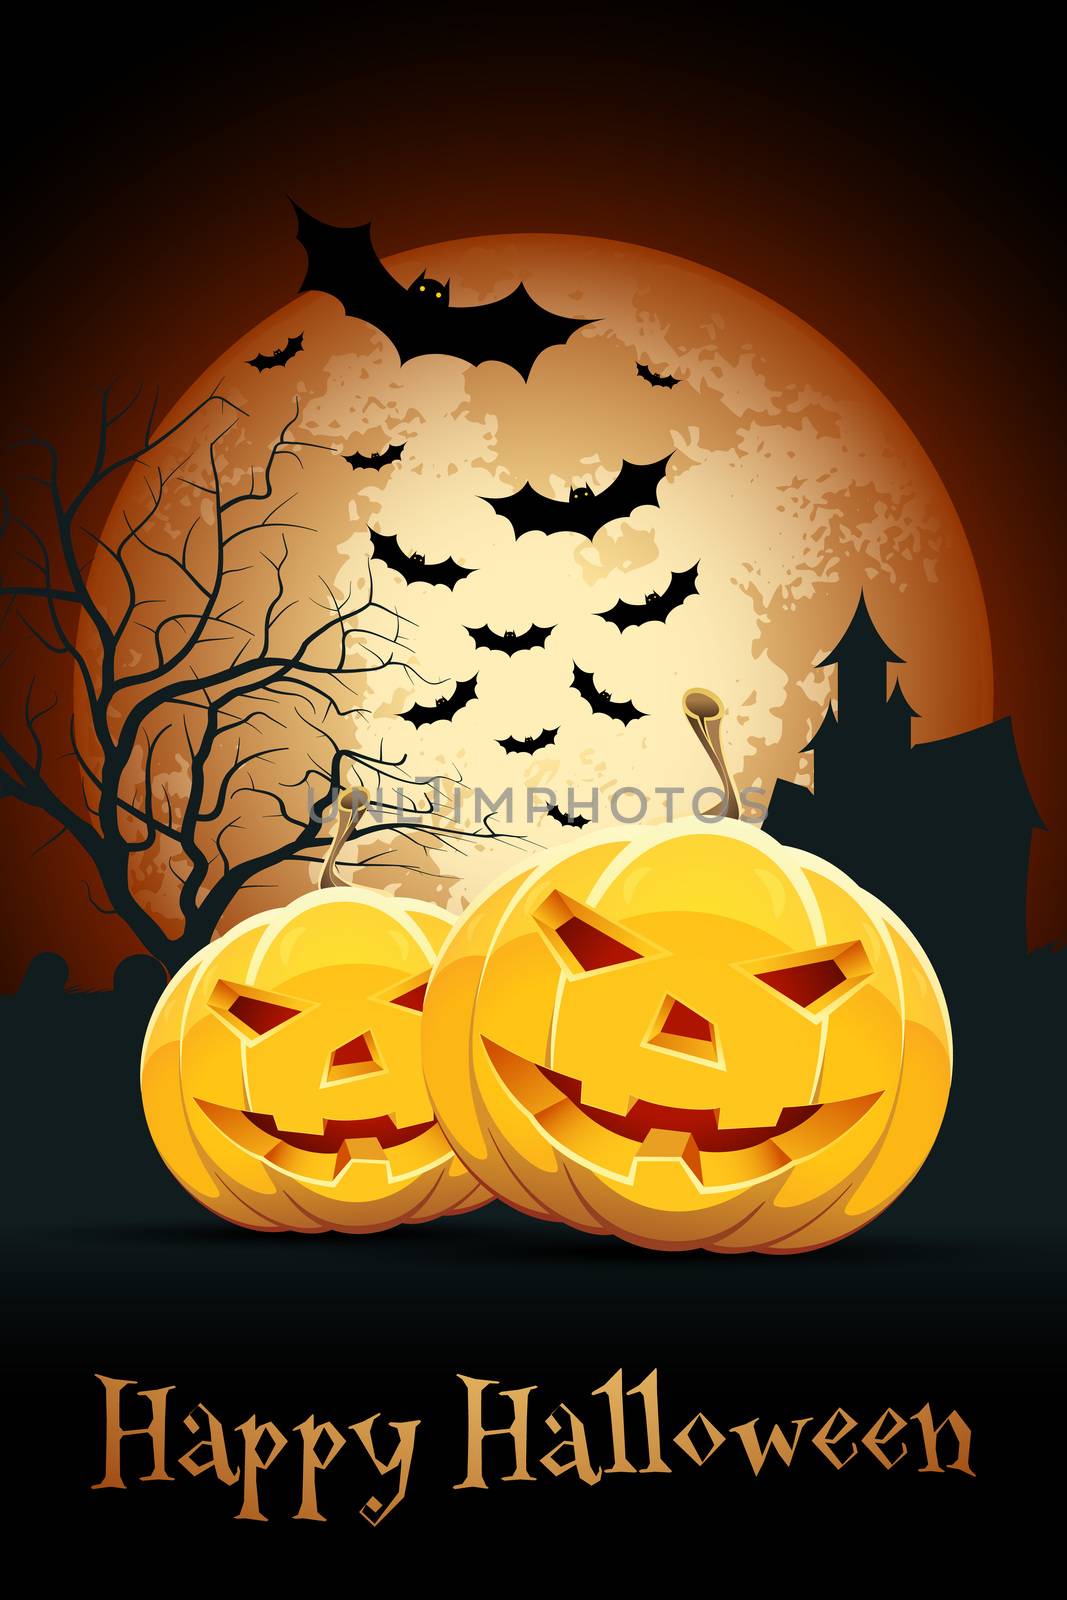 Halloween Party Card with Pumpkins and Haunted House by WaD